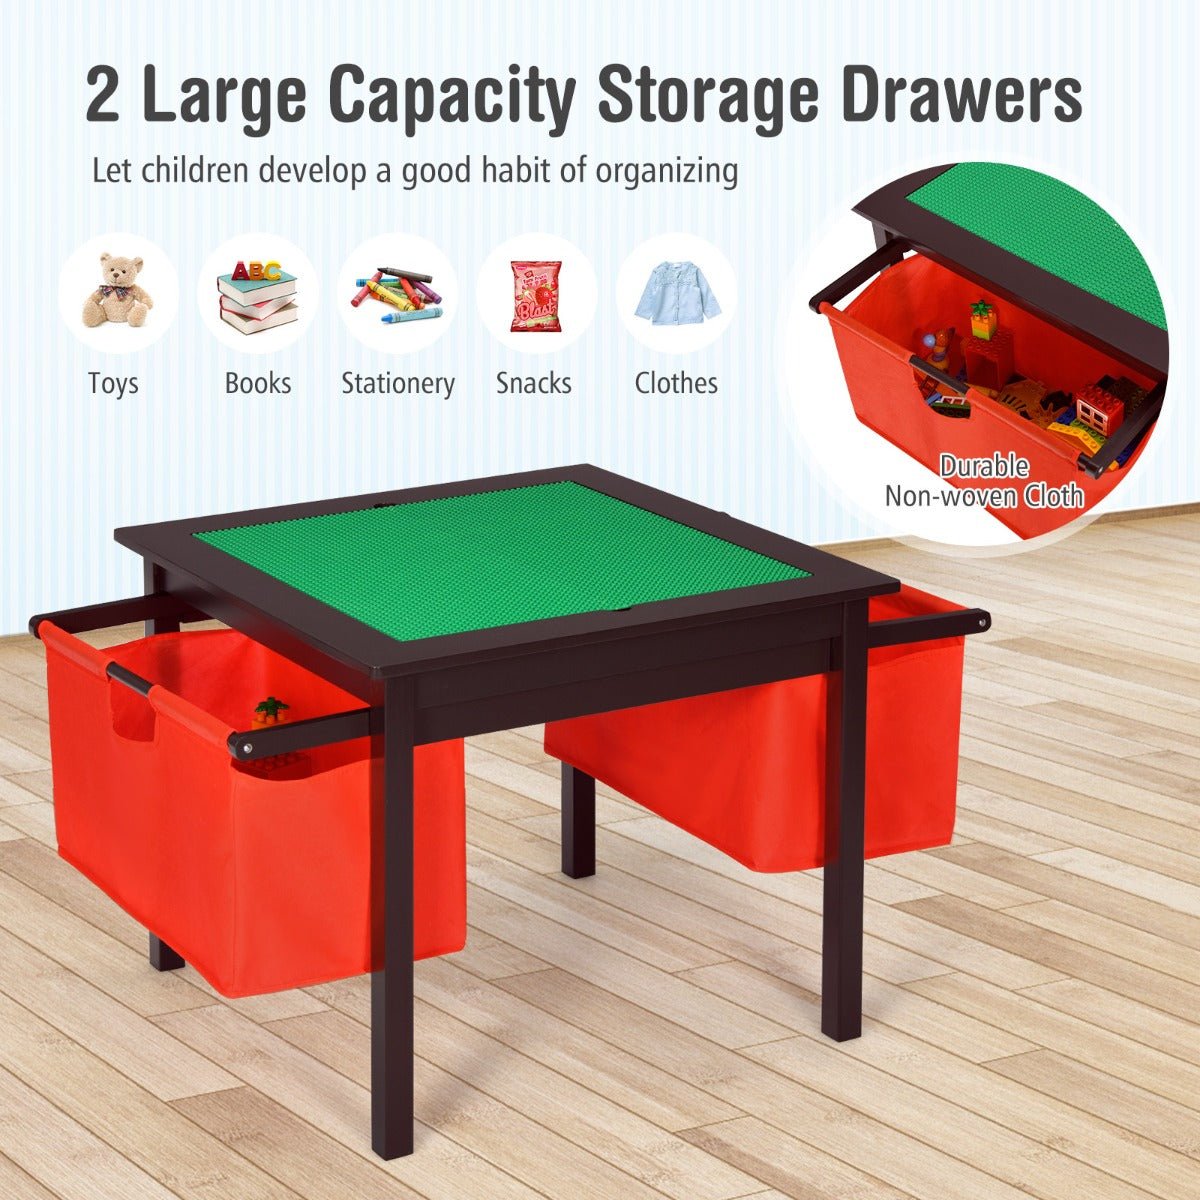 Enhance Playtime with the Espresso Kids Activity Table - Buy Now!